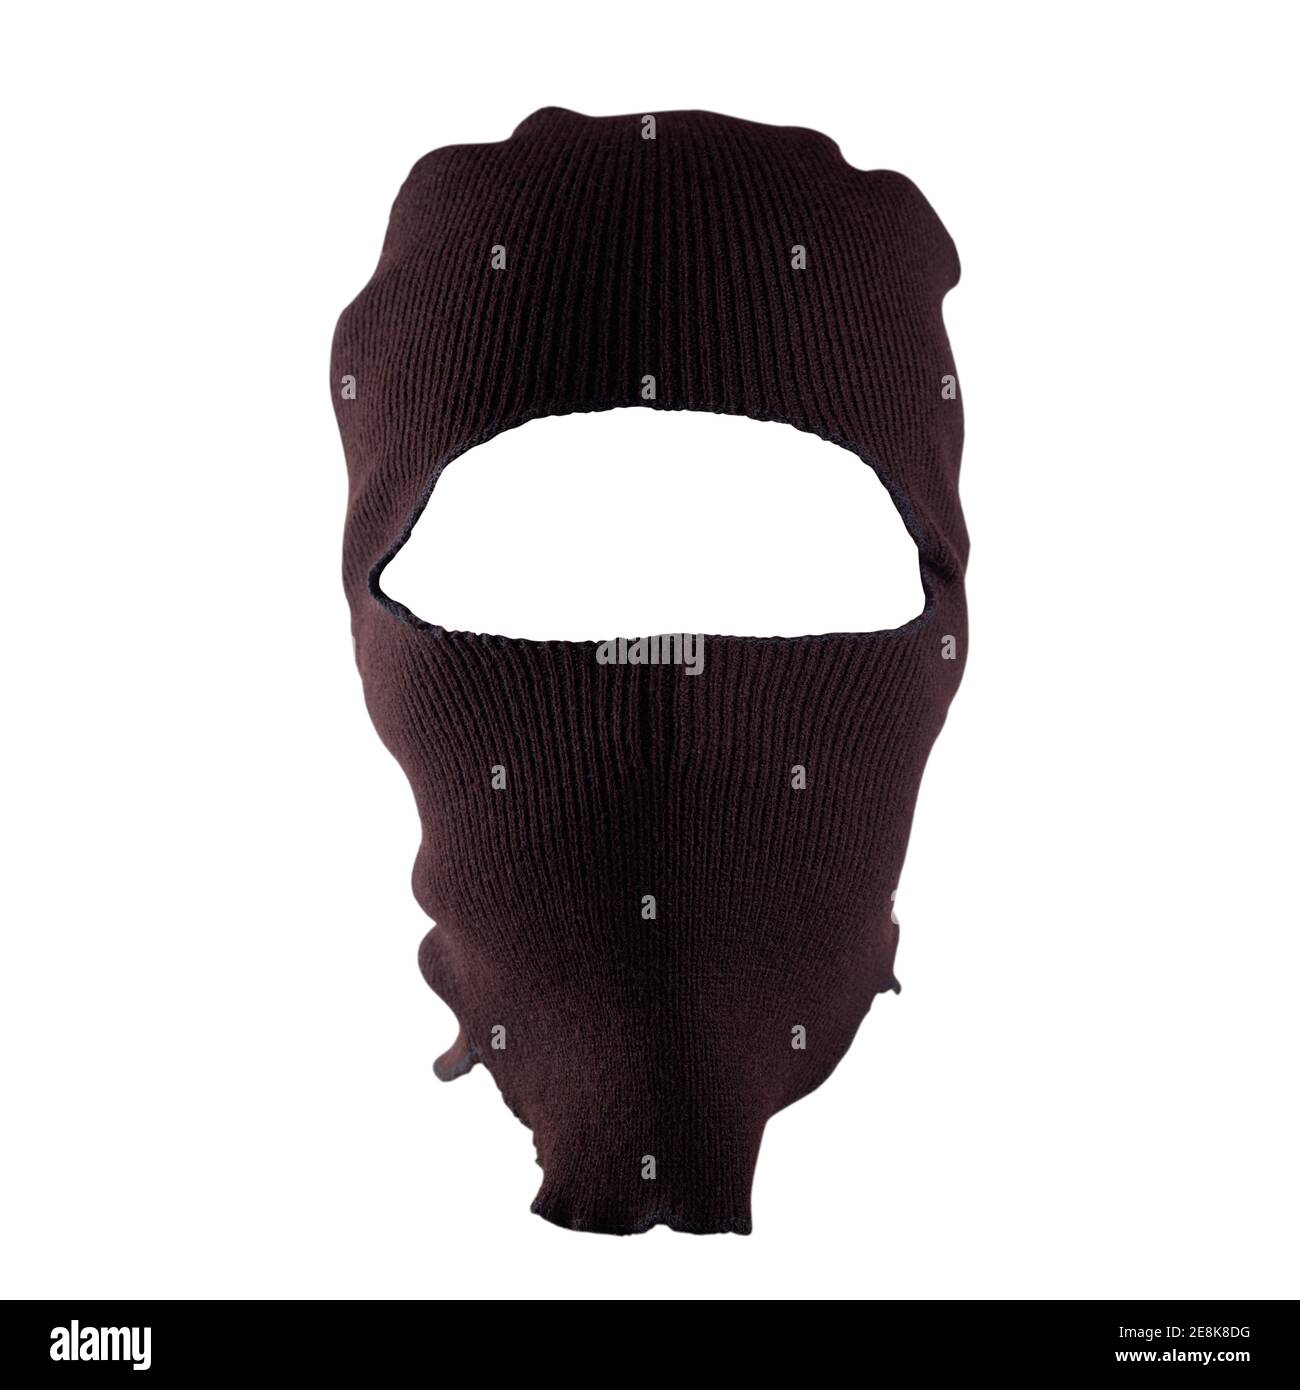 new balaclava headwear isolated on a white background. template for design Stock Photo